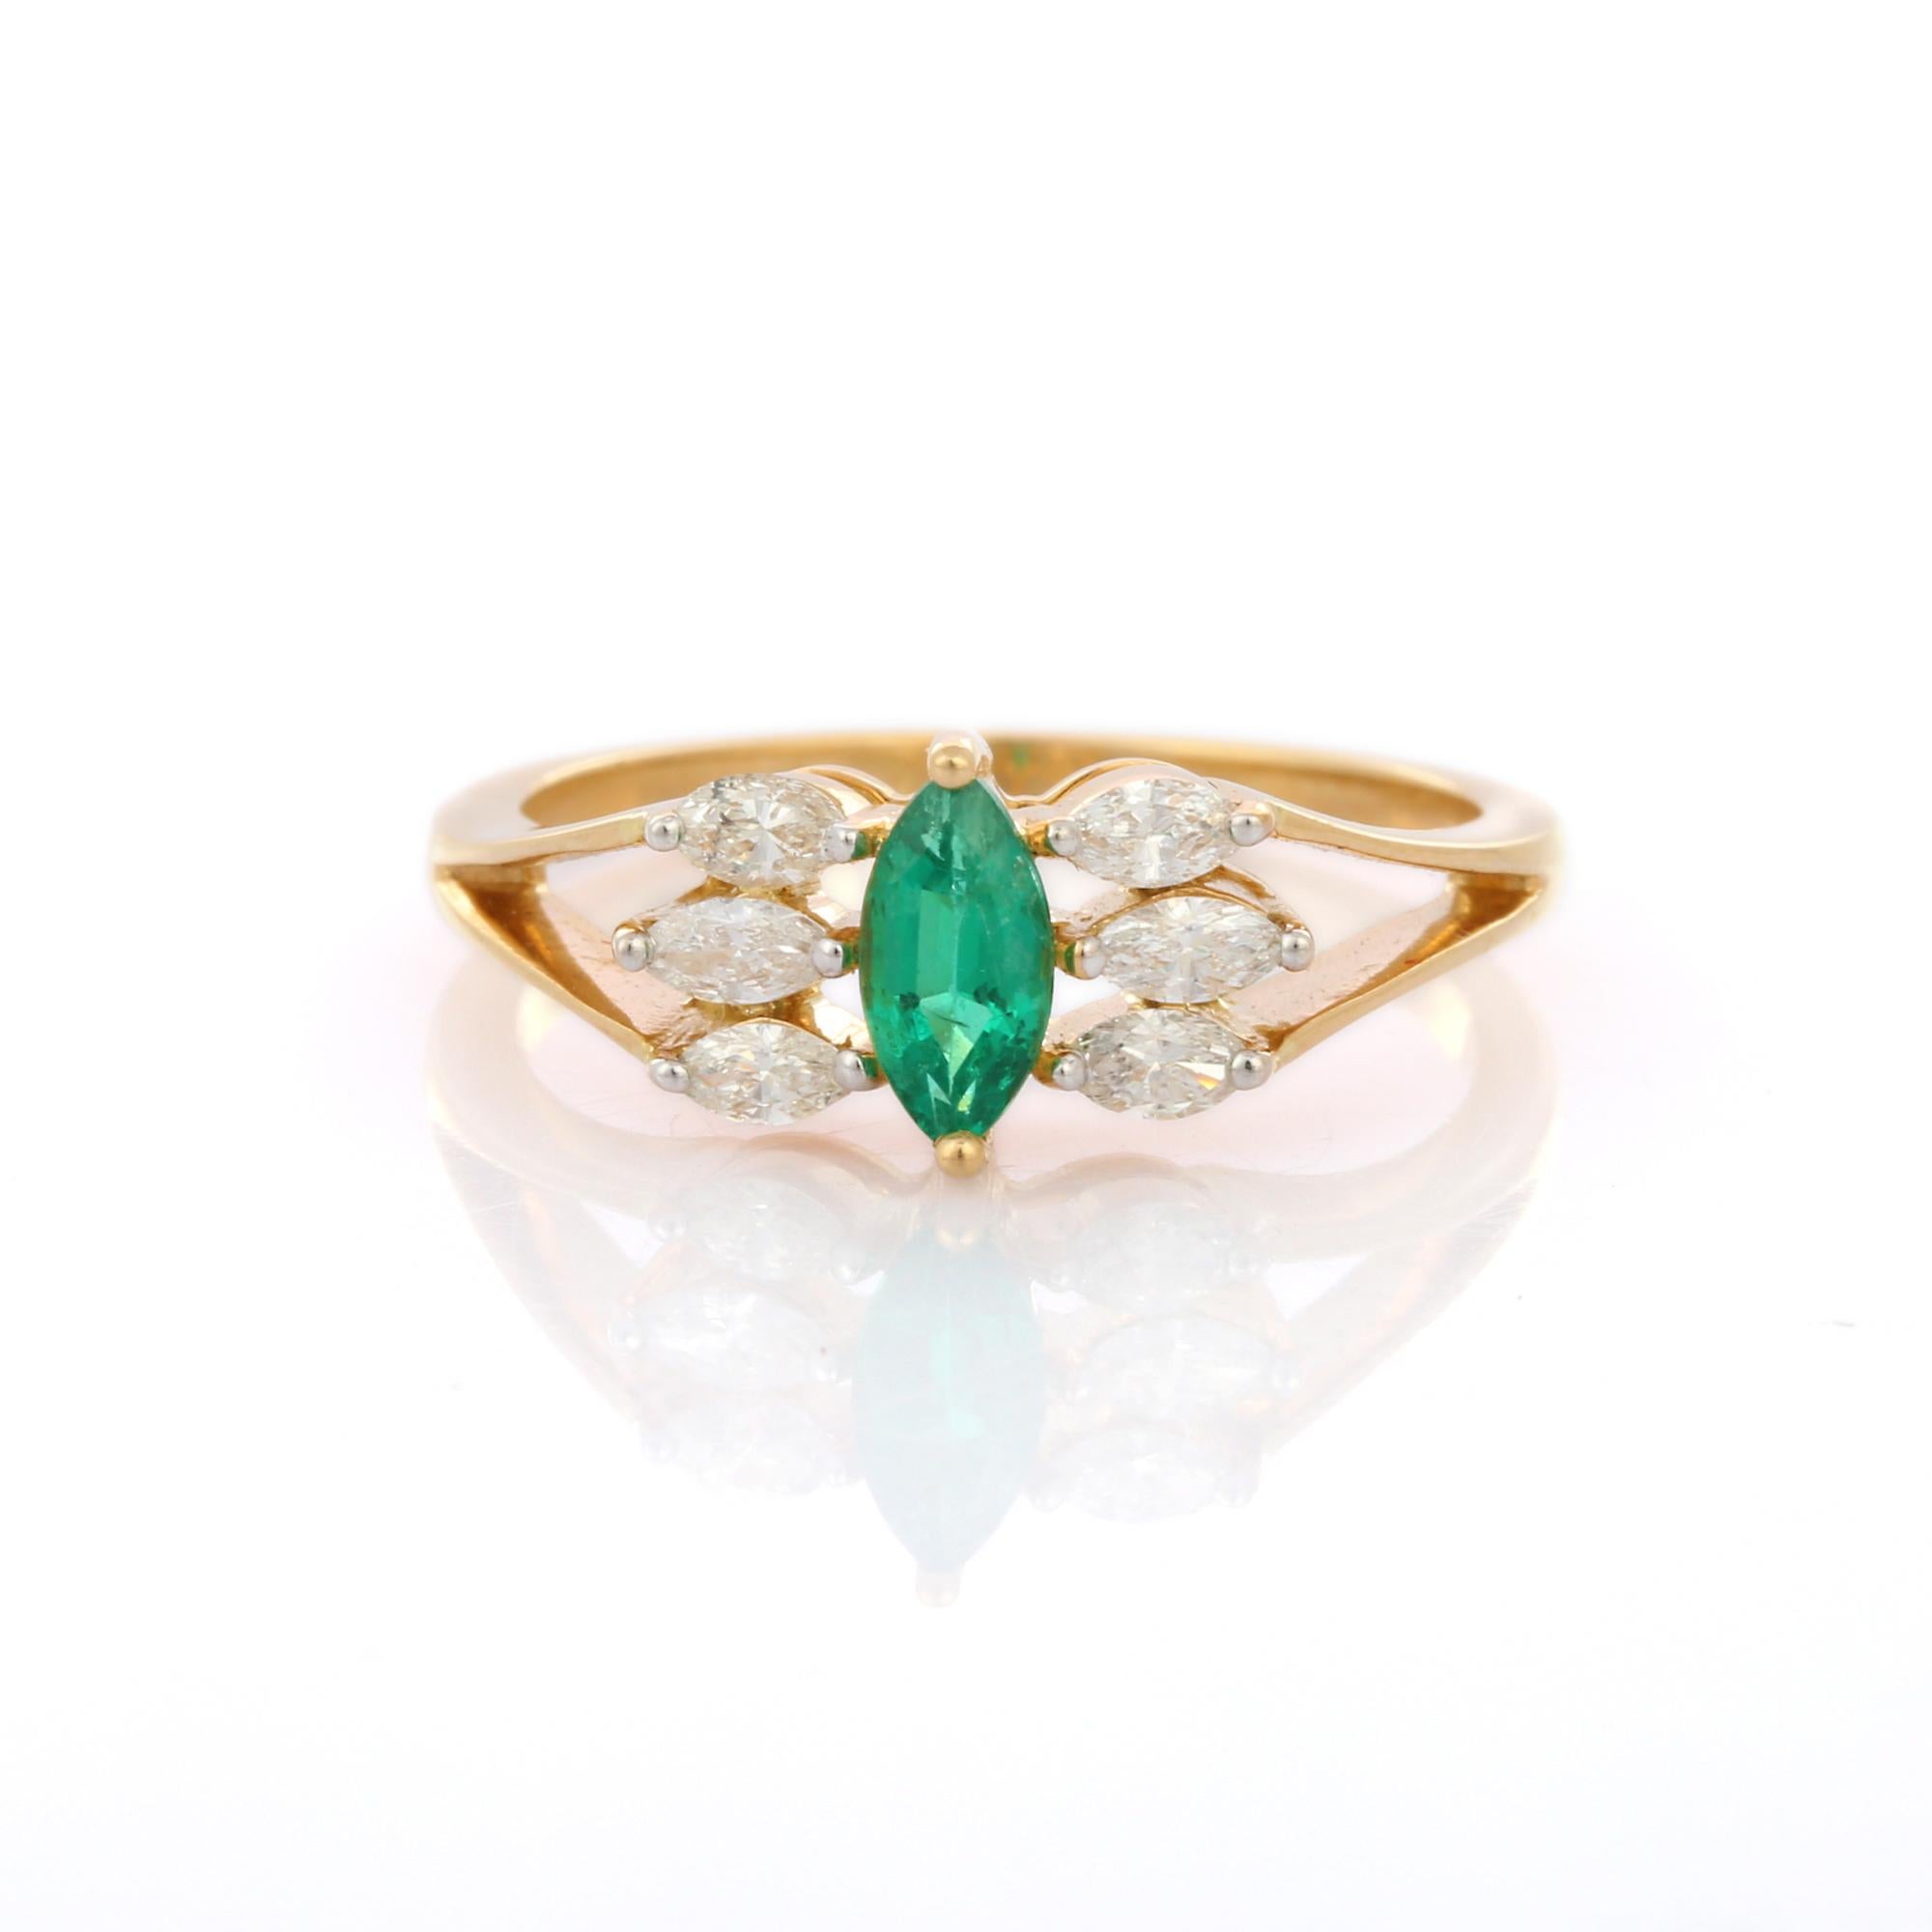 For Sale:  Startling Emerald and Diamond Designer Engagement Ring in 18K Solid Yellow Gold 2